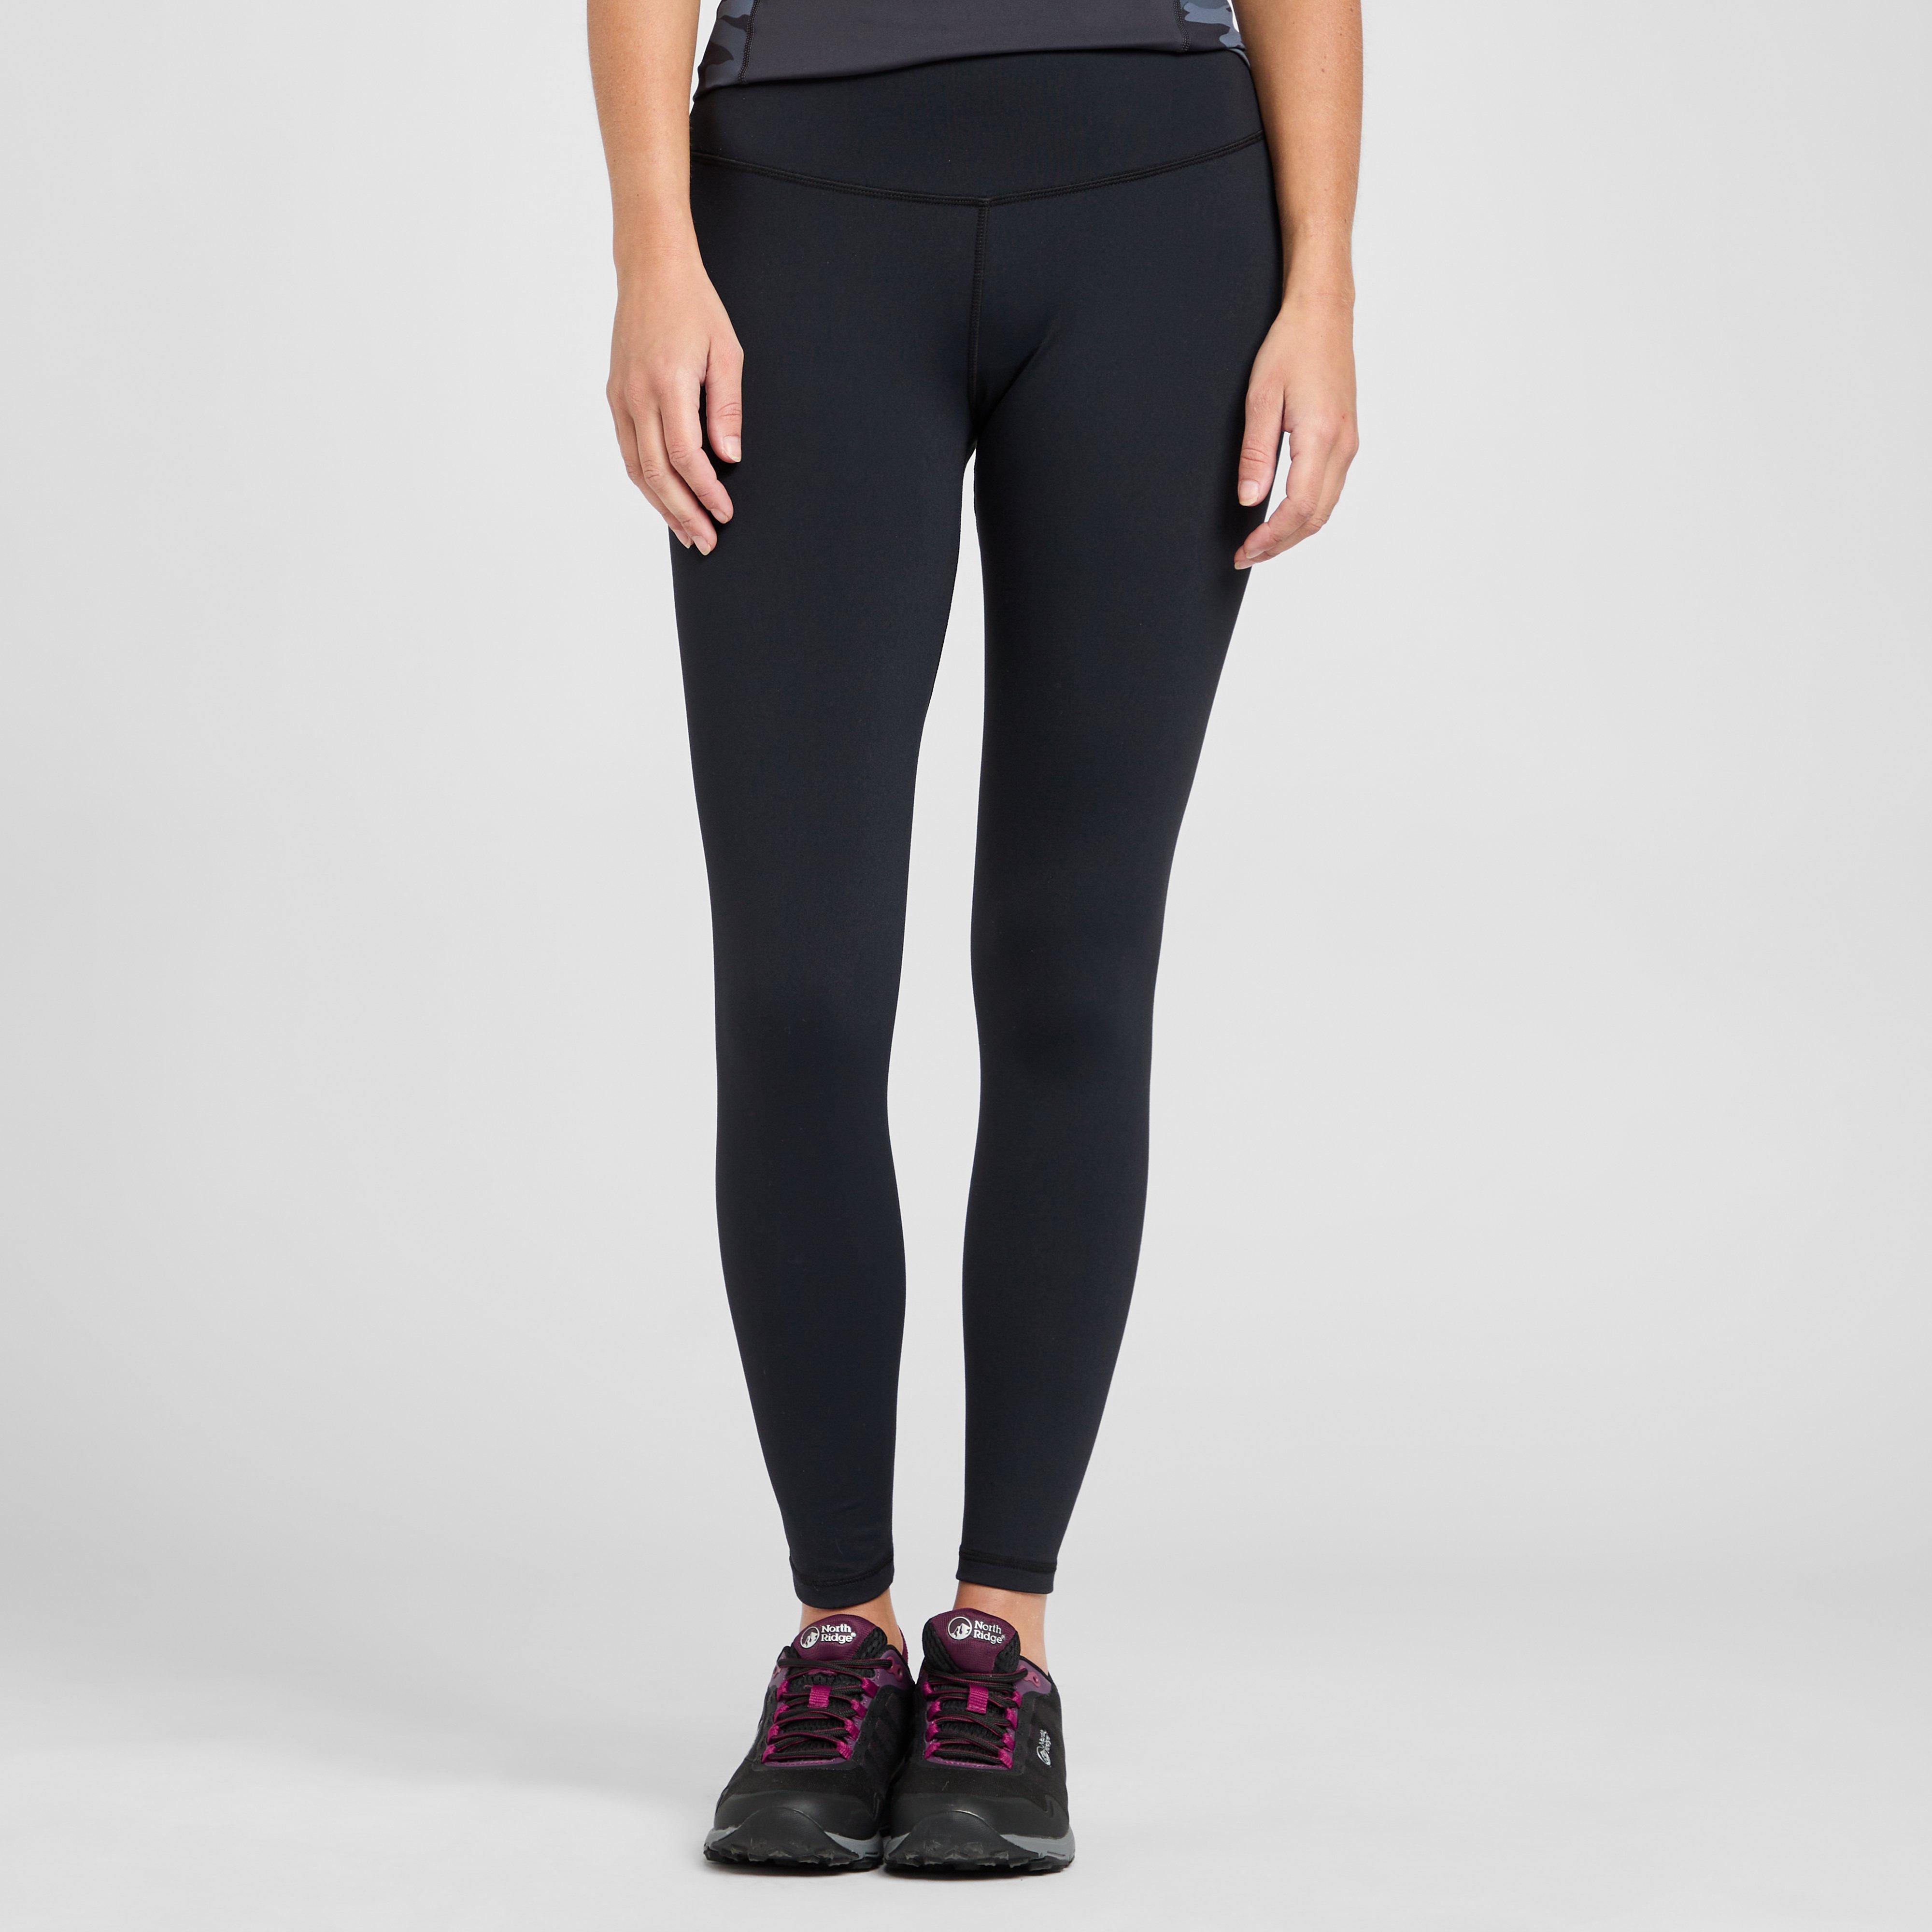 Craghoppers Women's Velocity Tights